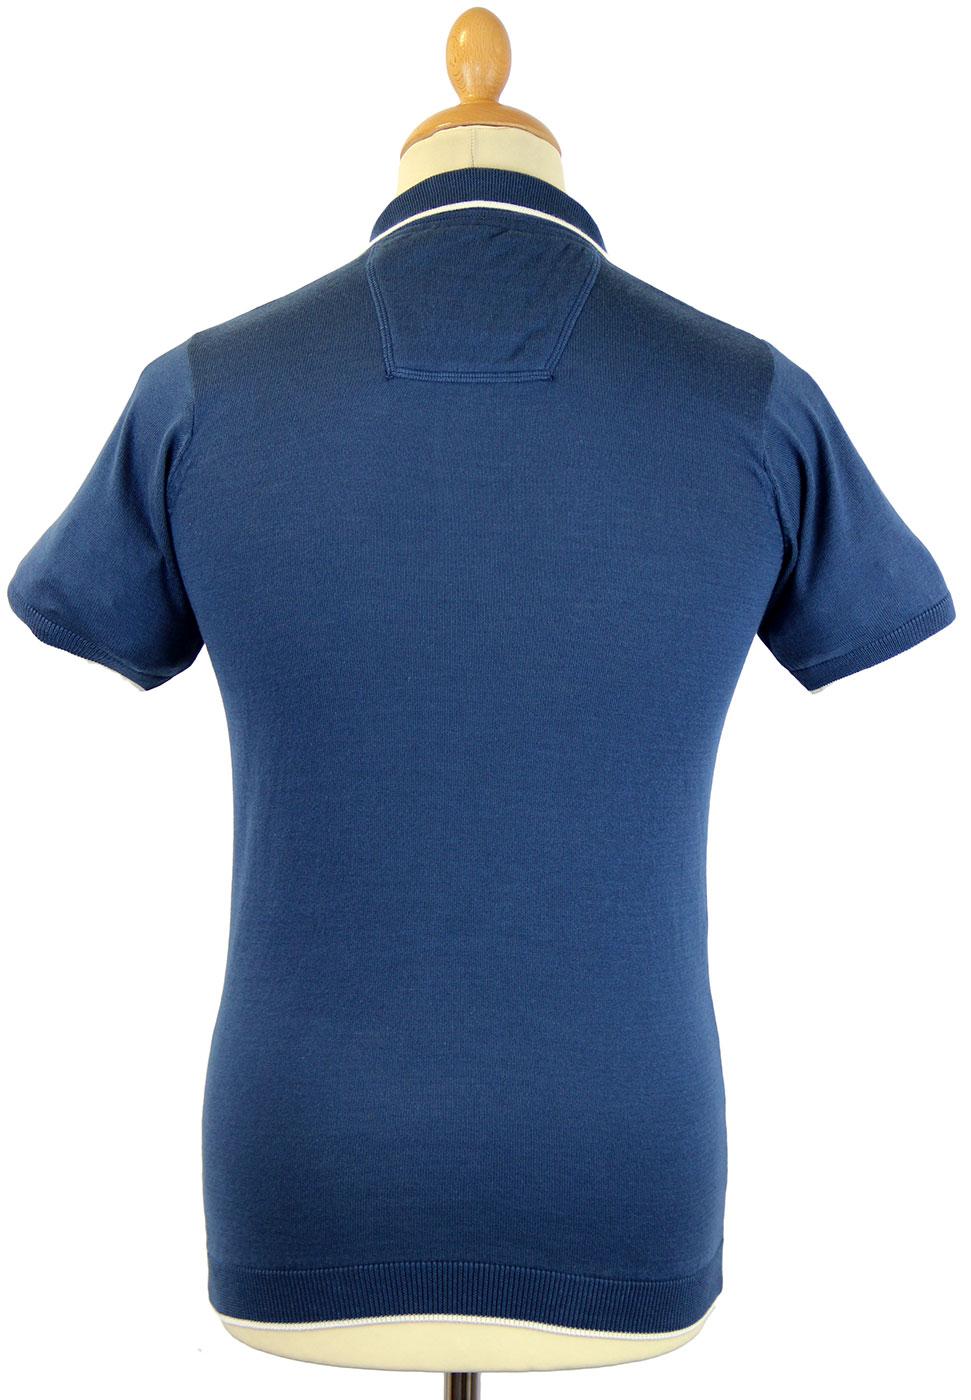 GUIDE LONDON Retro 60s Mod Knitted Polo Top with Tipping Blue